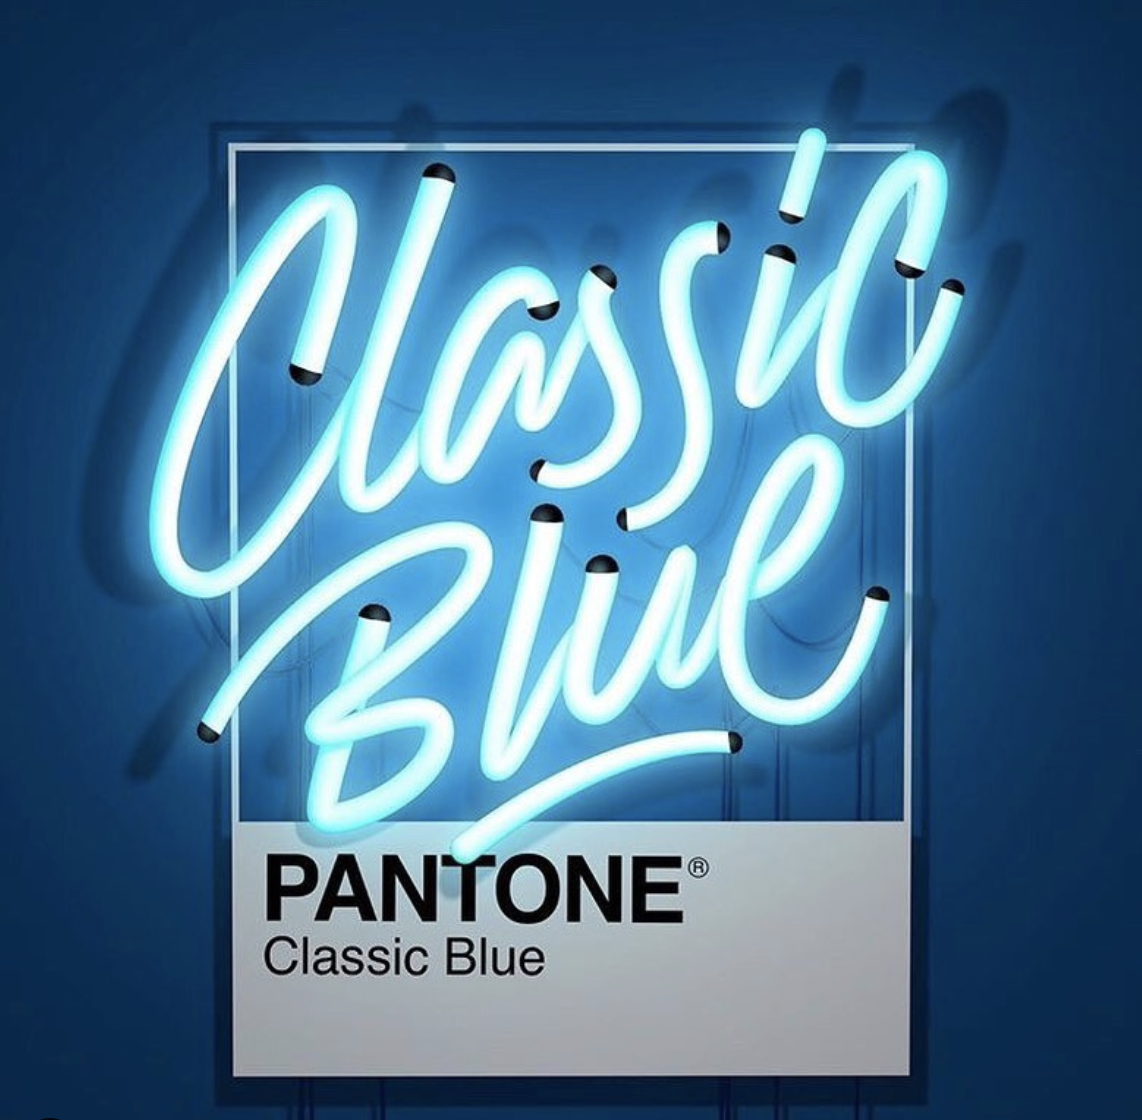 The reassuring qualities of the thought-provoking PANTONE 19-4052 Classic Blue highlight our desire for a dependable and stable foundation.png